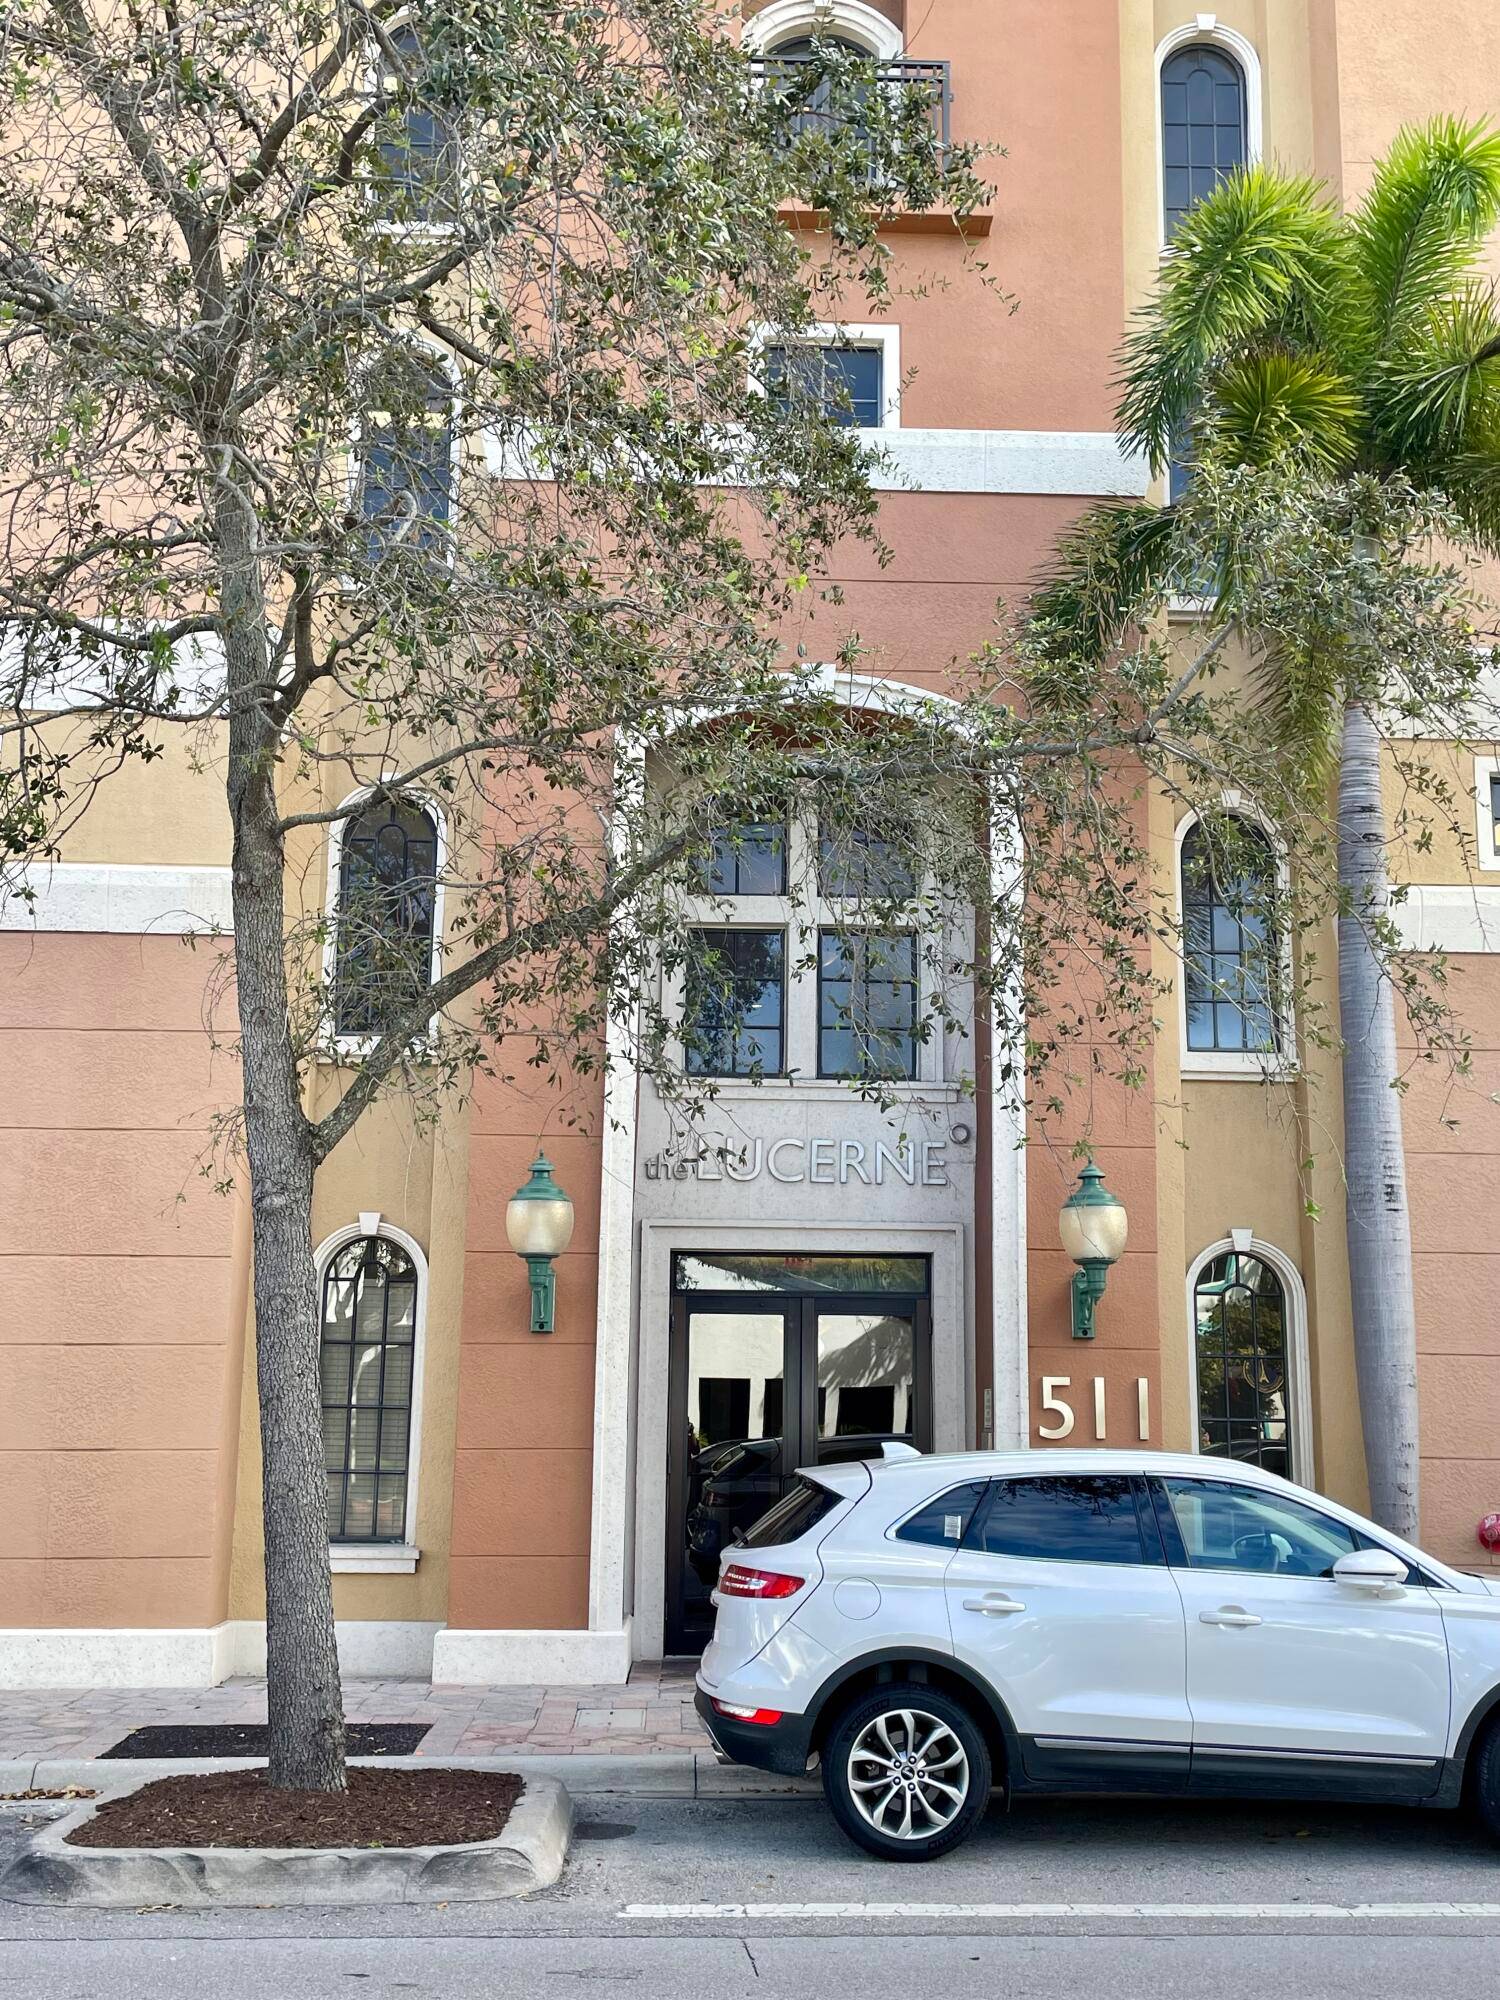 Sought after Contemporary Luxury Condo in heart of charming downtown Lake Worth Beach.